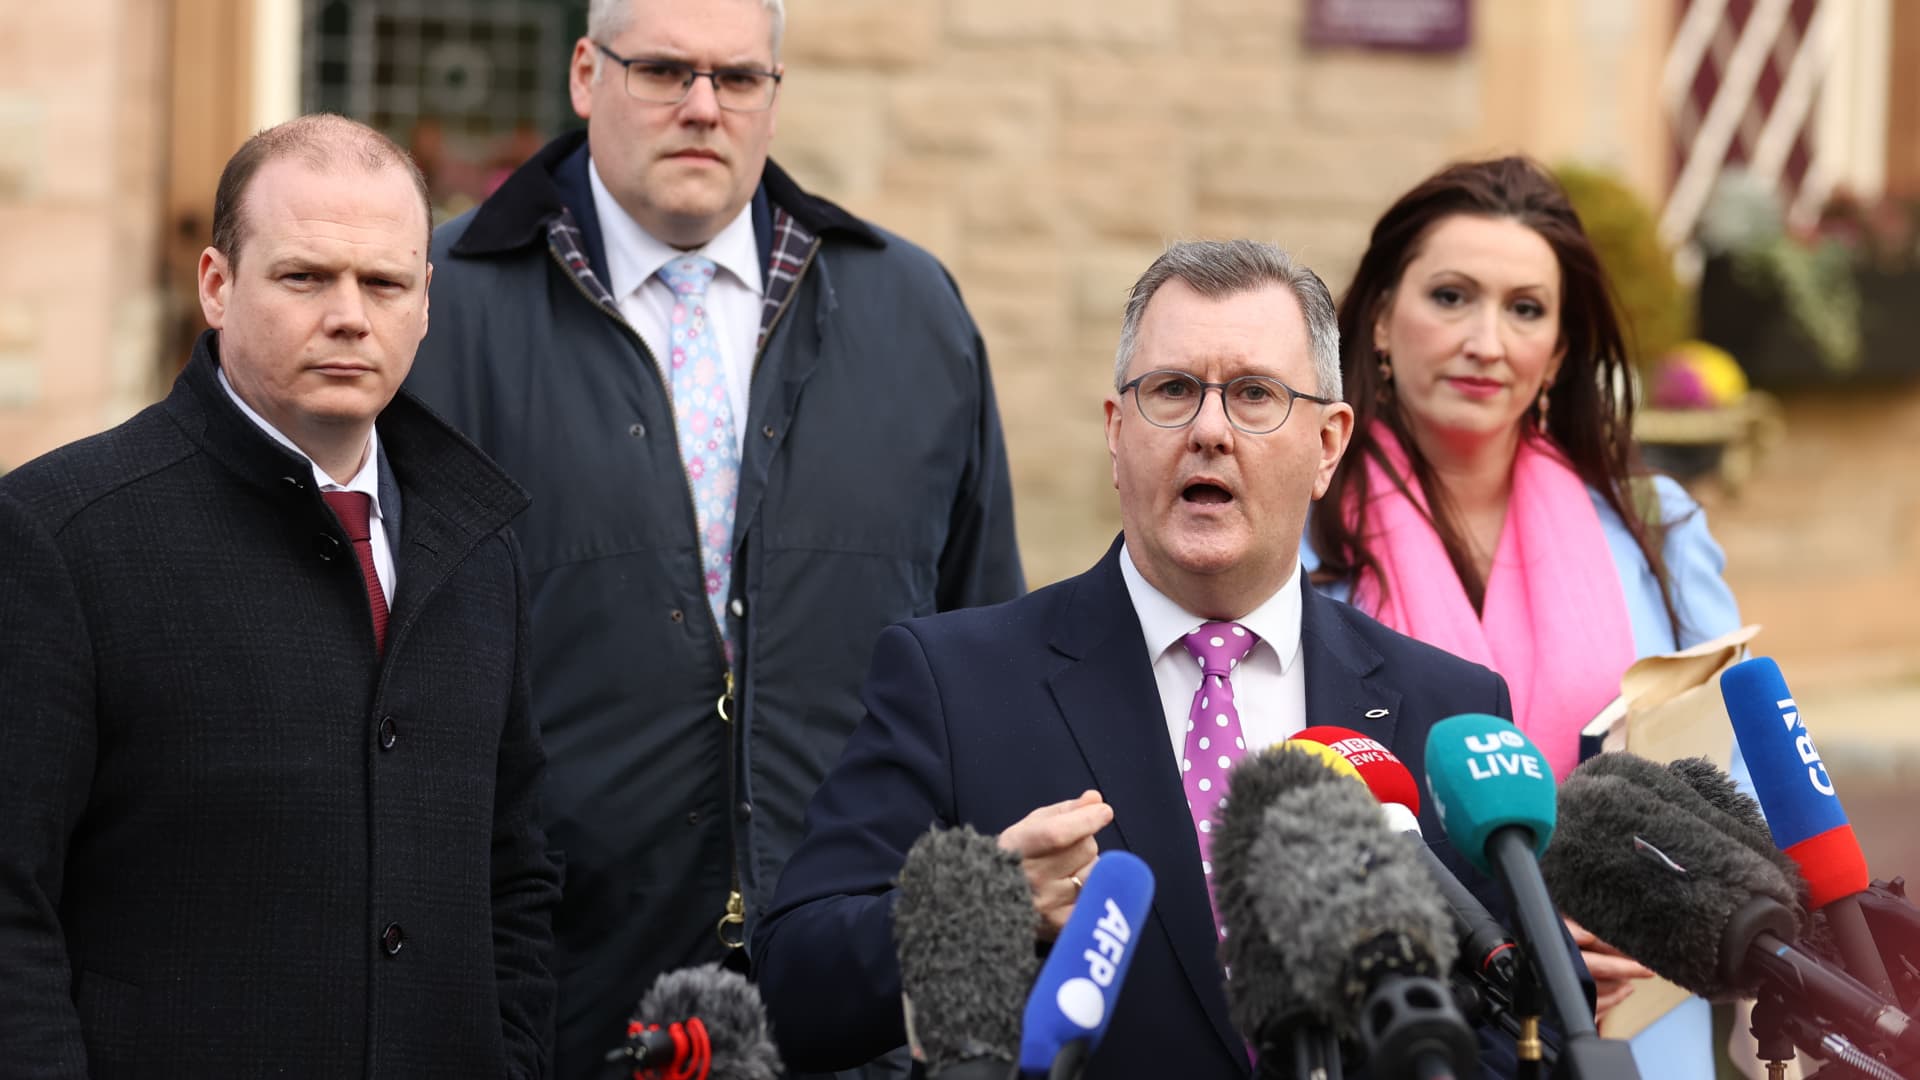 BELFAST, U.K., Feb. 17, 2023: DUP Leader Sir Jeffrey Donaldson speaks to reporters outside the Culloden Hotel in Belfast after Northern Irish leaders held talks with U.K. Prime Minister Rishi Sunak over the Northern Ireland Protocol.